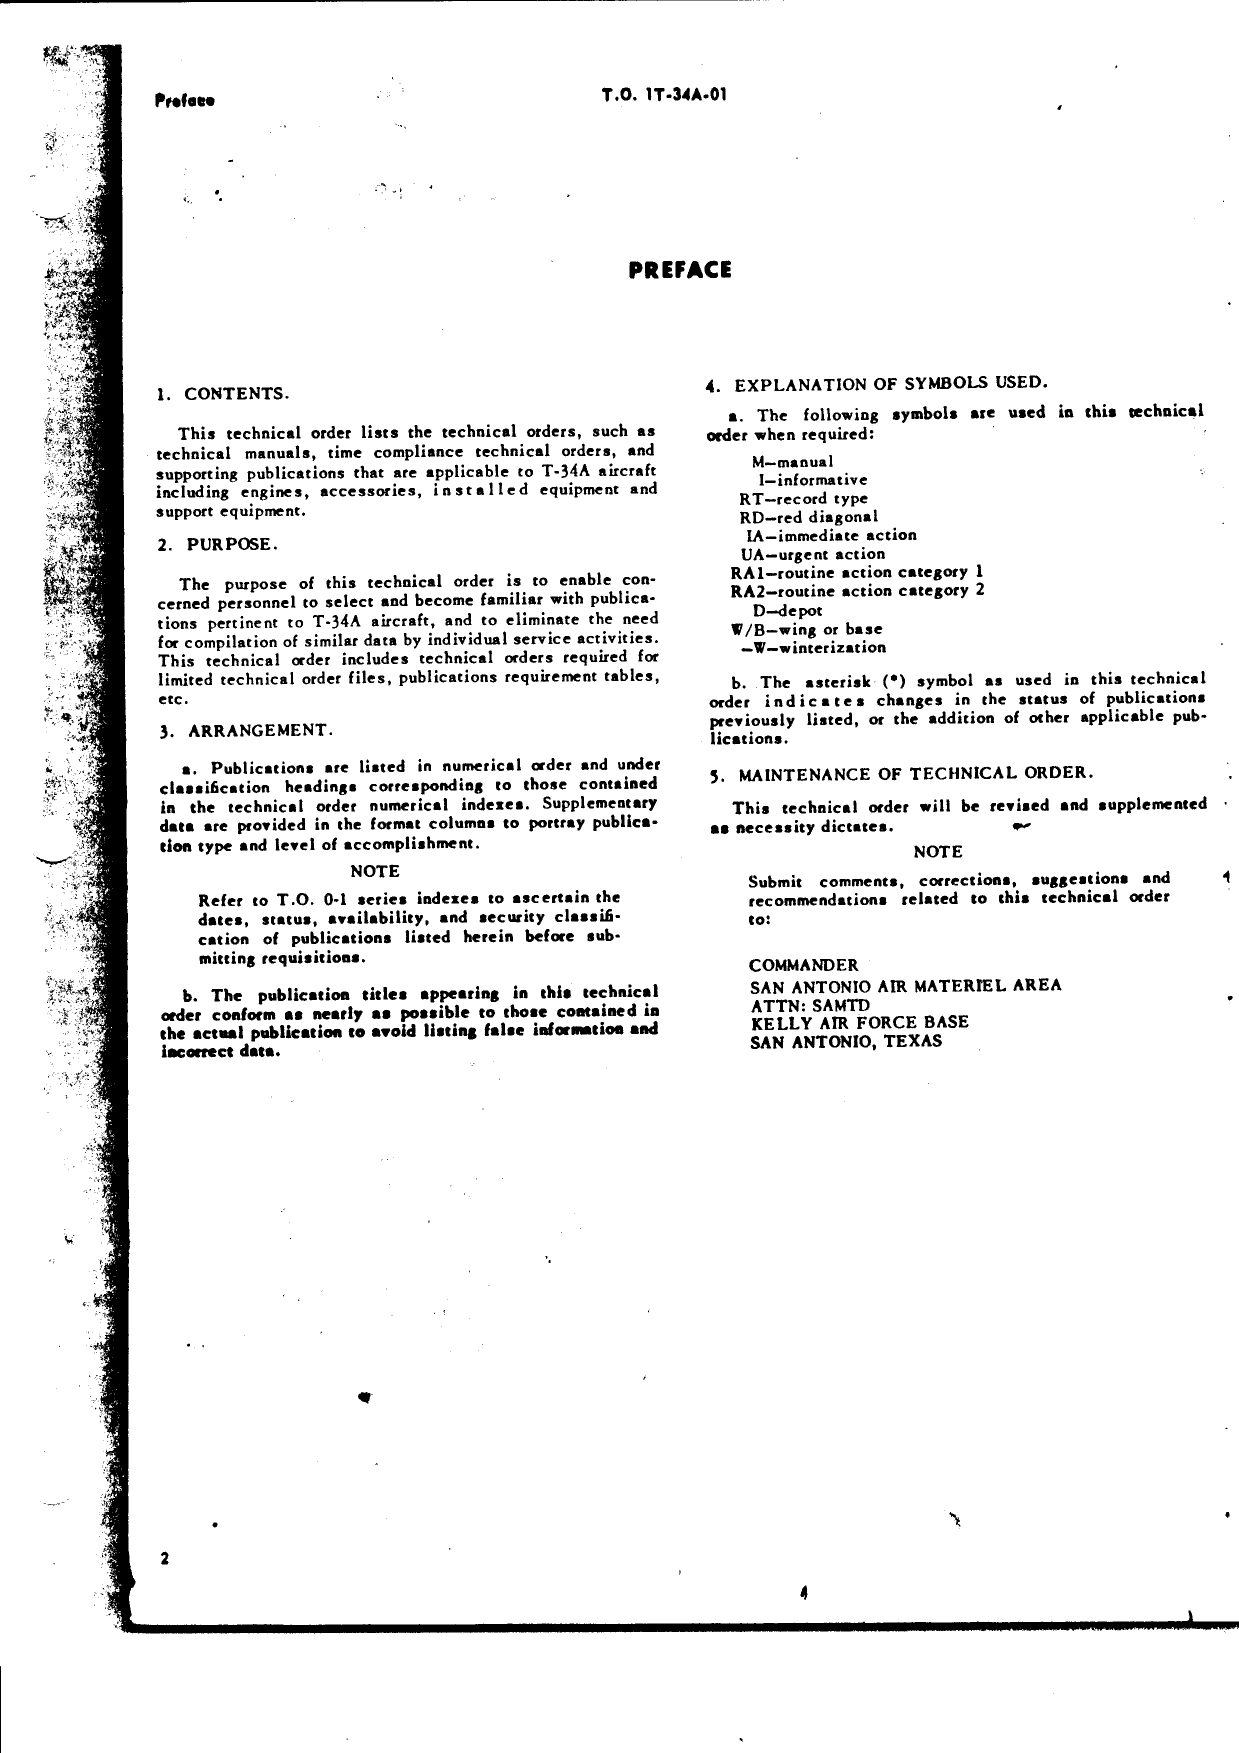 Sample page 2 from AirCorps Library document: List of Applicable Publications for T-34A Aircraft and Equipment